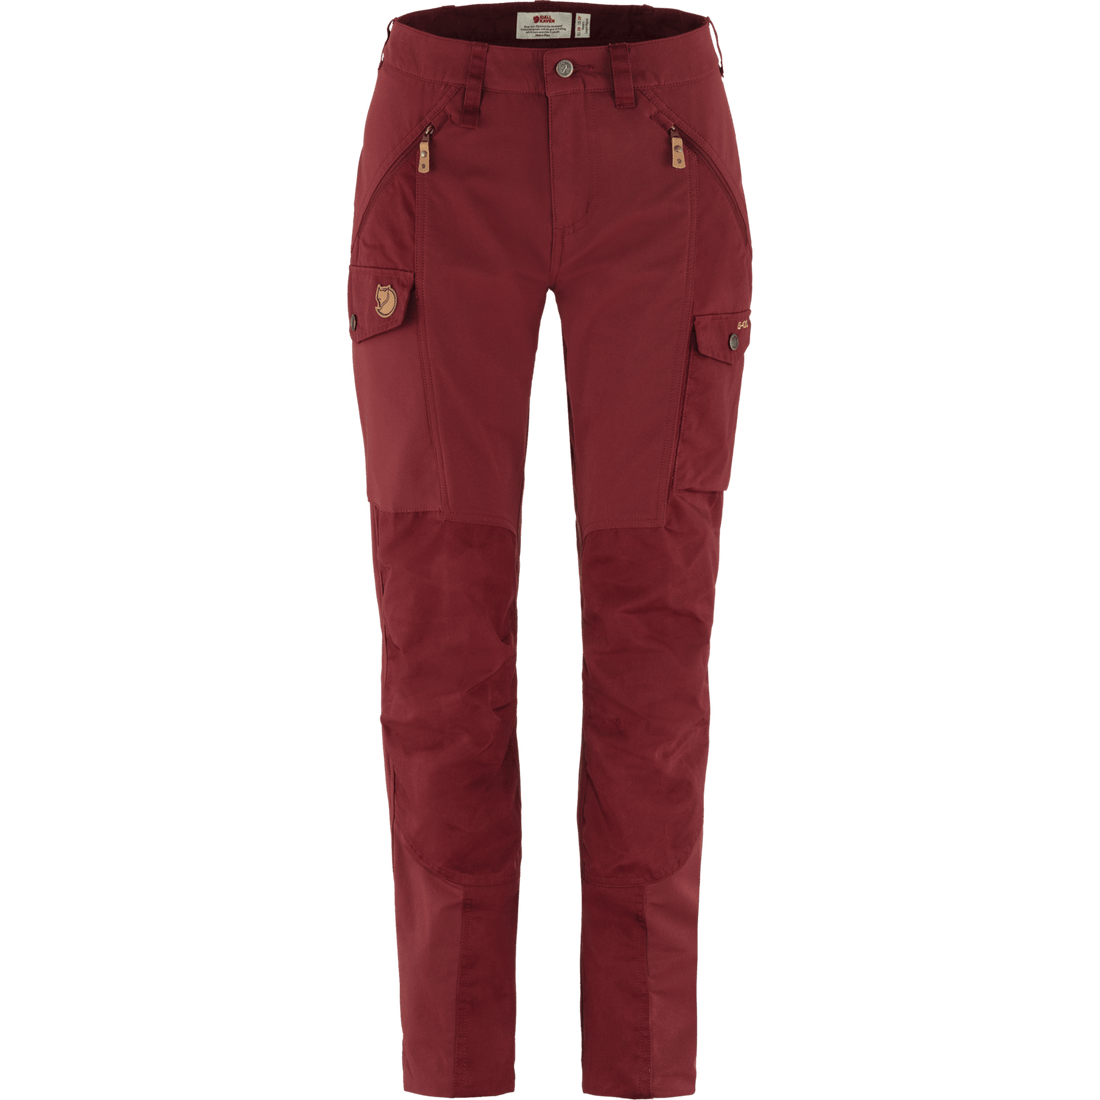 Nikka Trousers Curved W